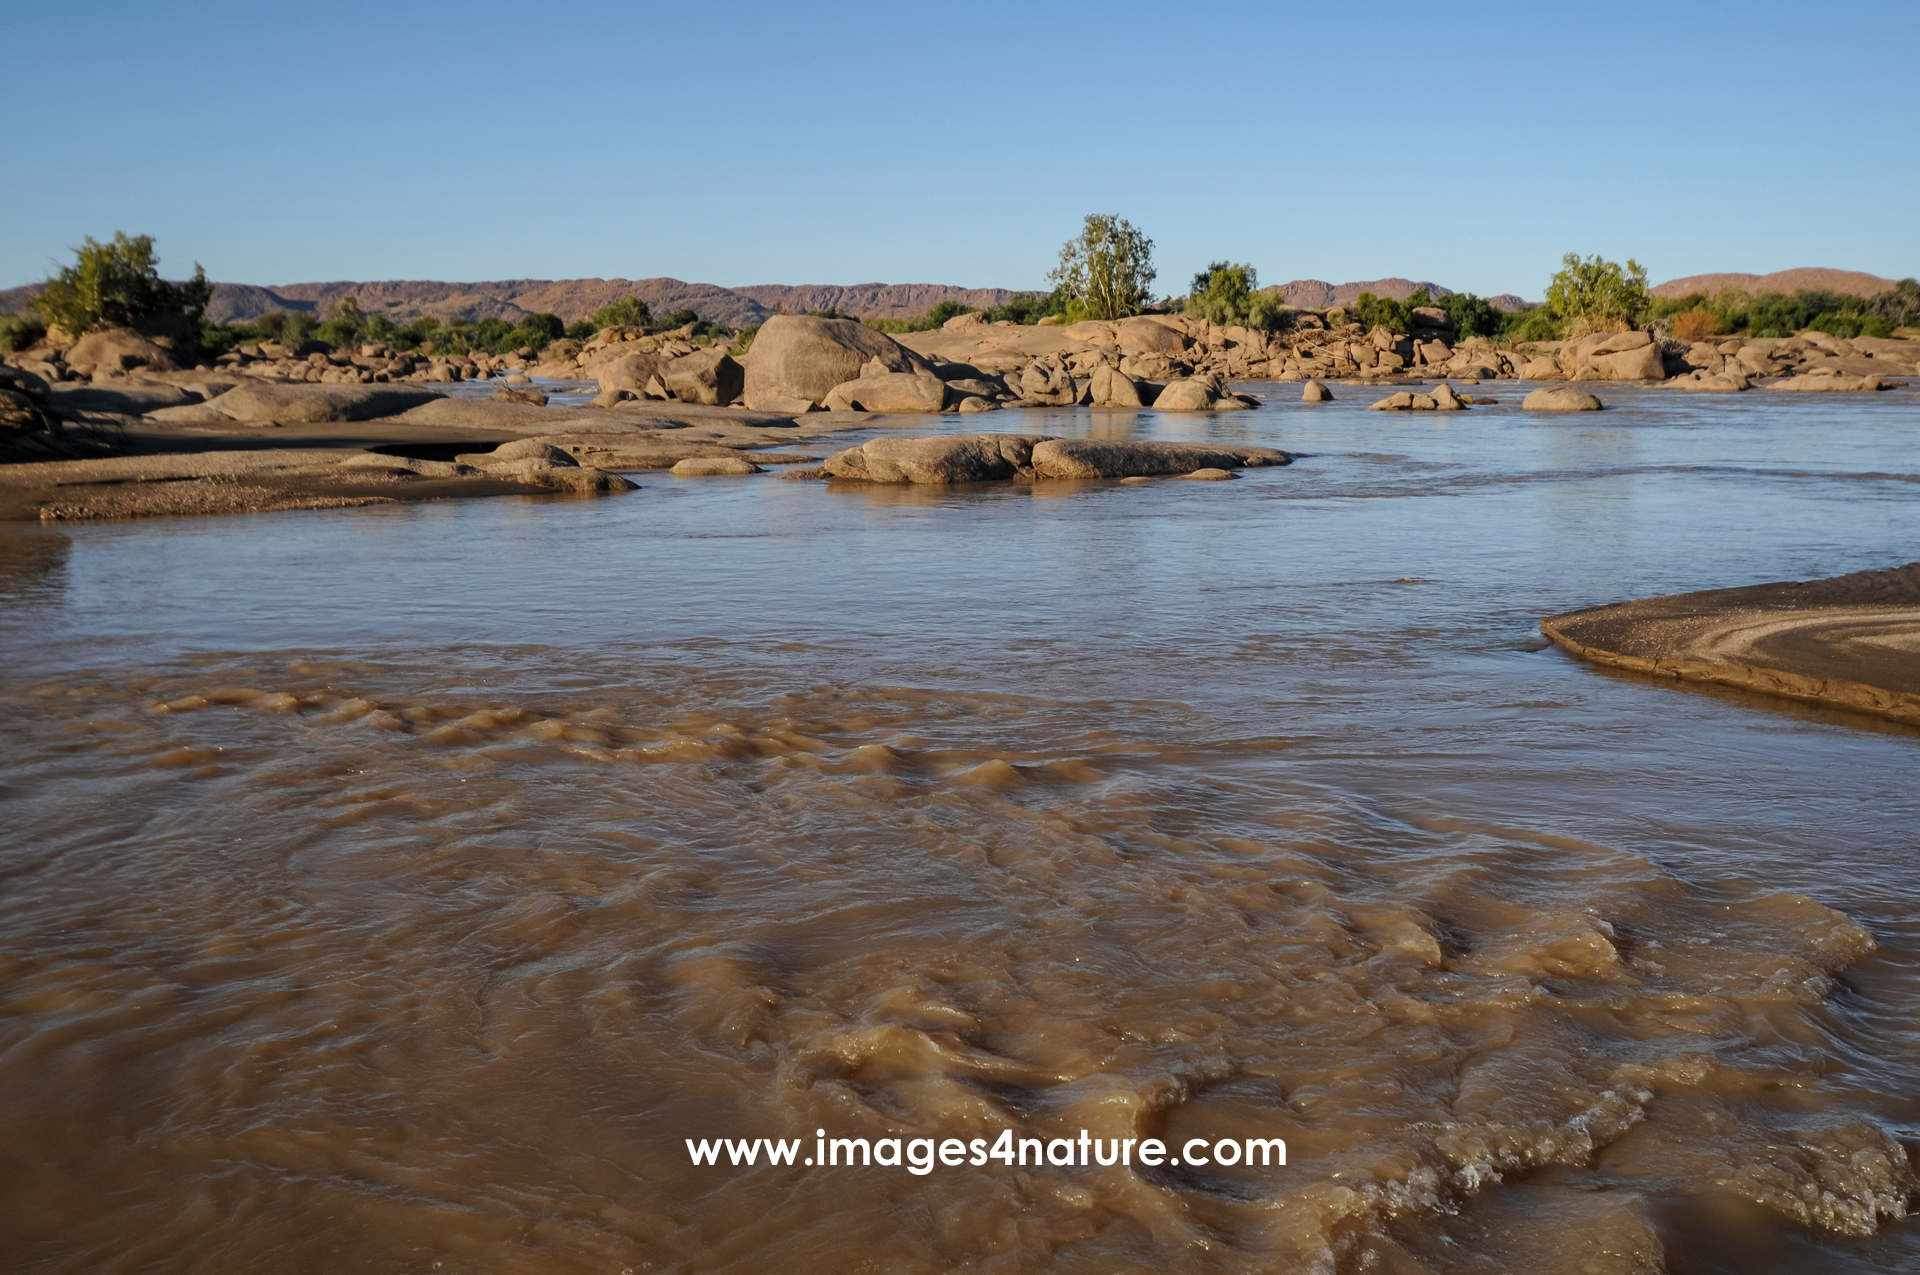 River carrying low water in a dry landscape with many boulders